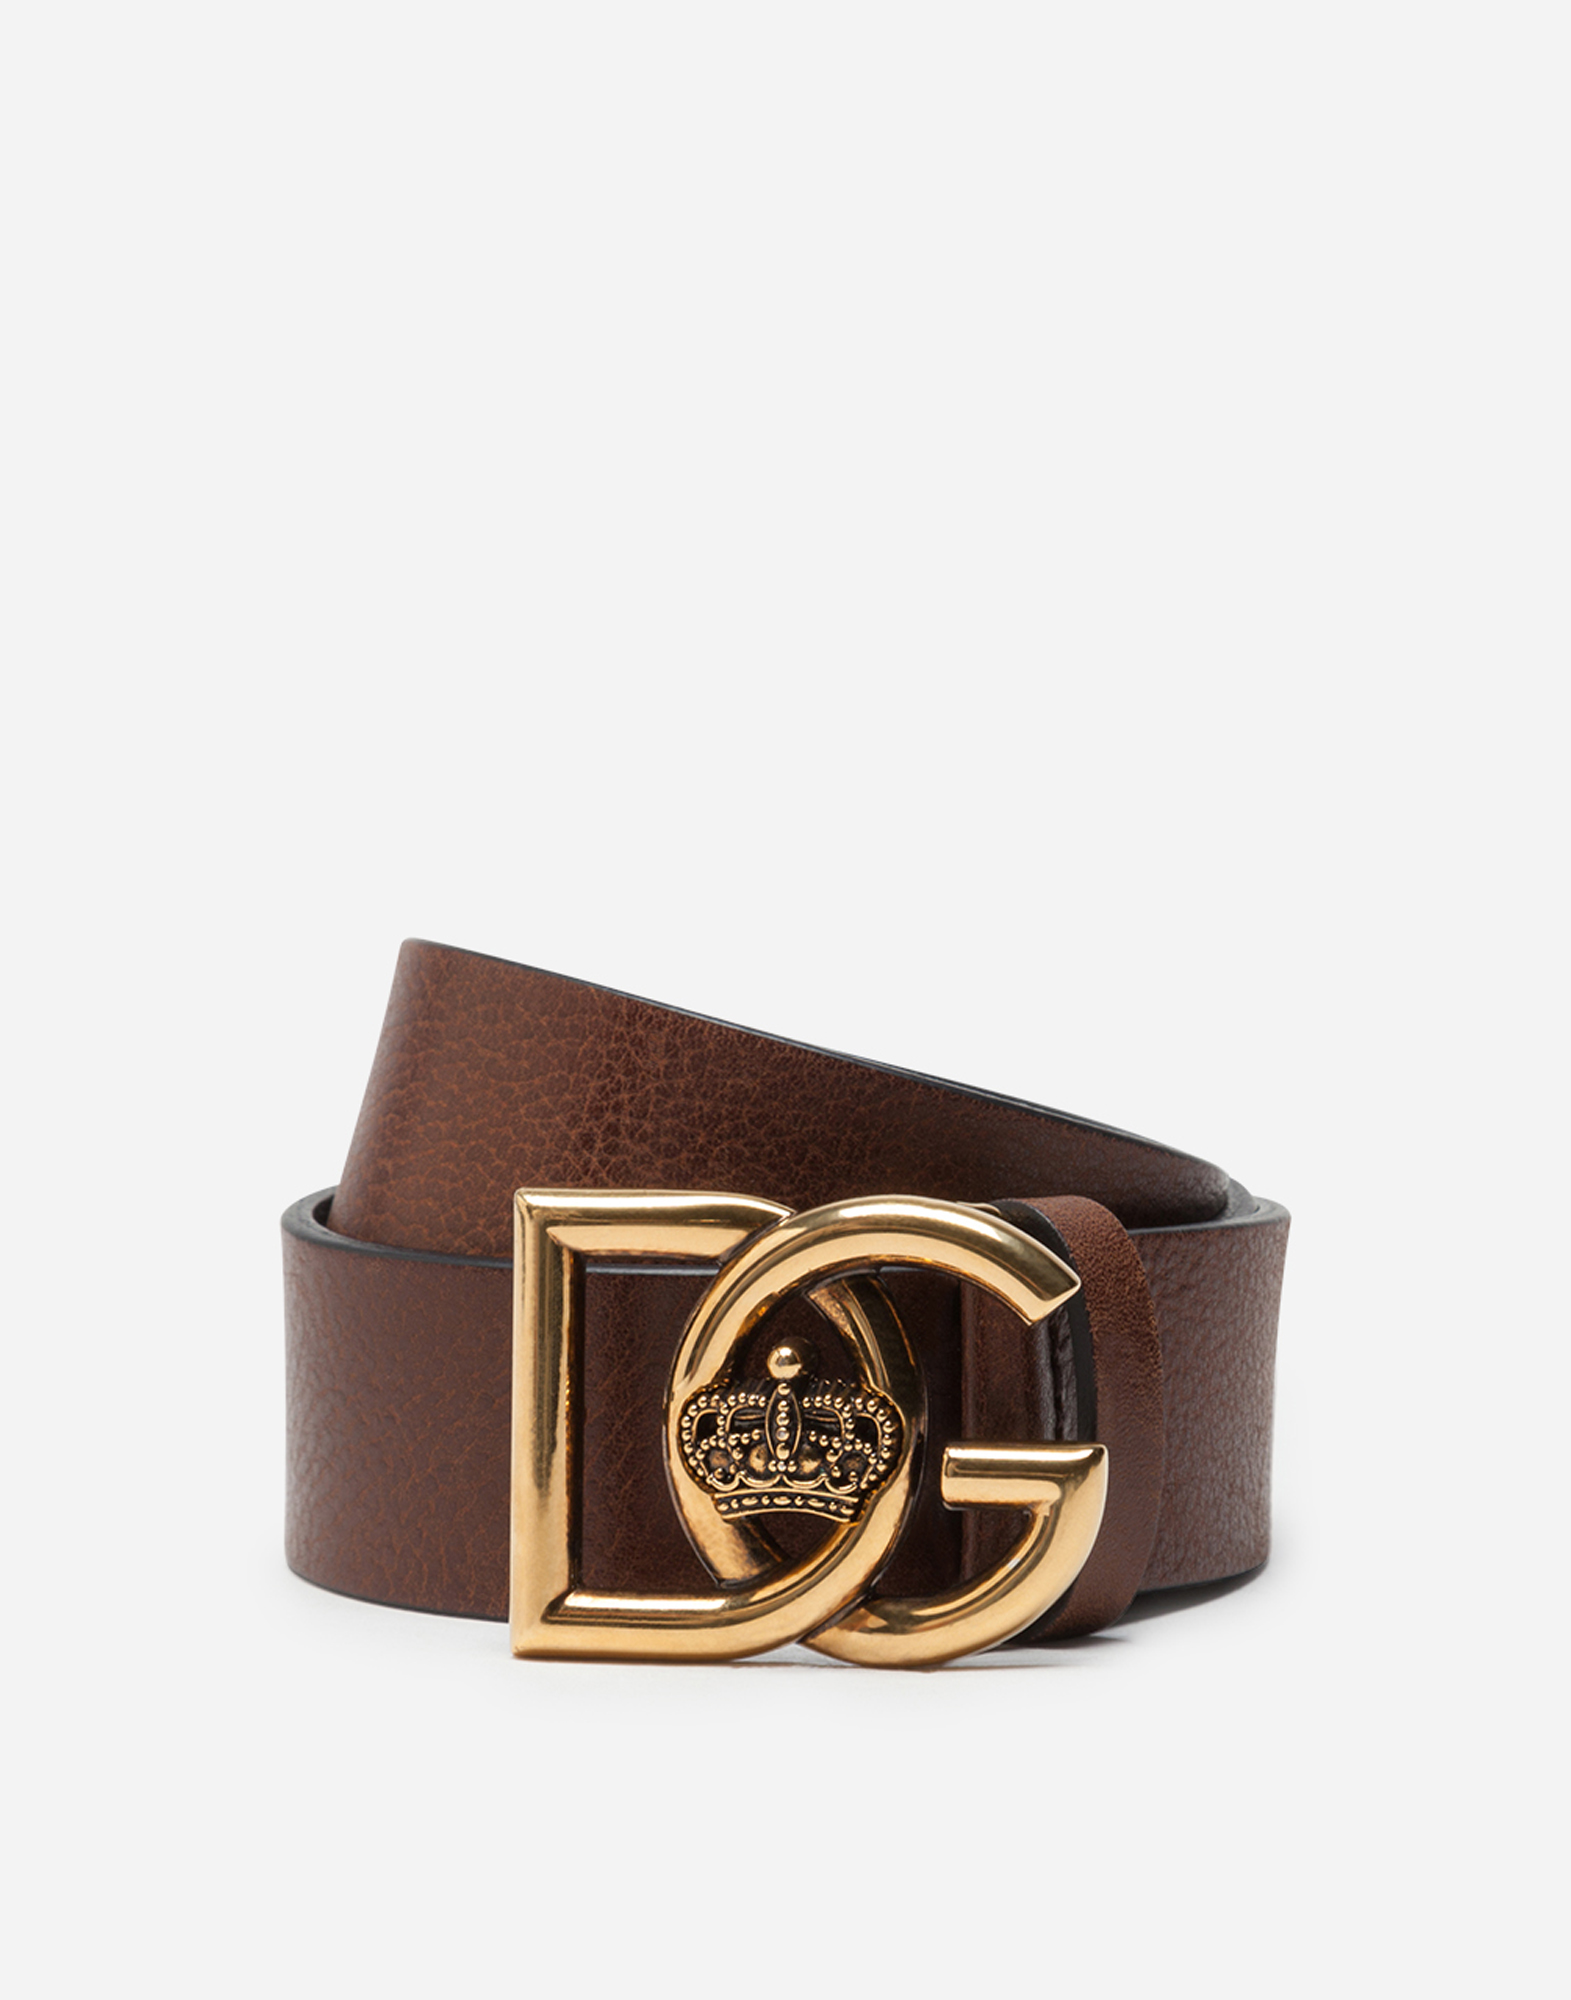 Tumbled leather belt with DG crosed logo in Brown